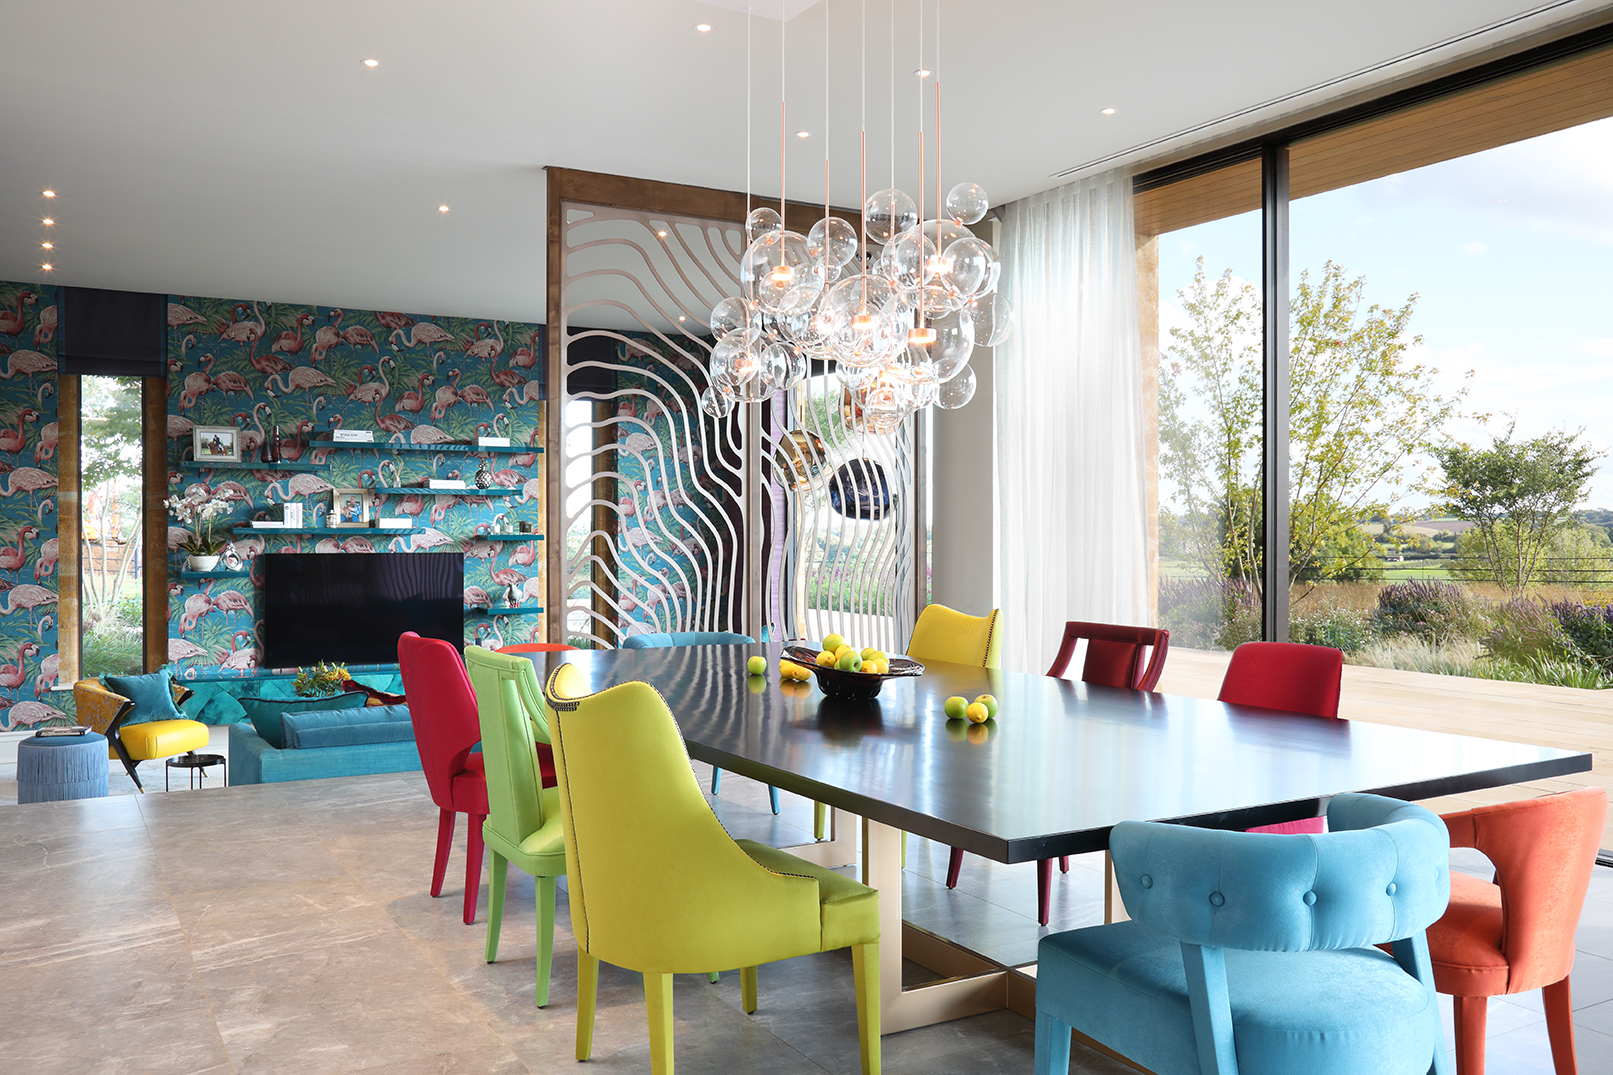 Open plan dining area with sunken seating area beyond a wavy metal screen. Mix and match coloured upholstered chairs around the table.